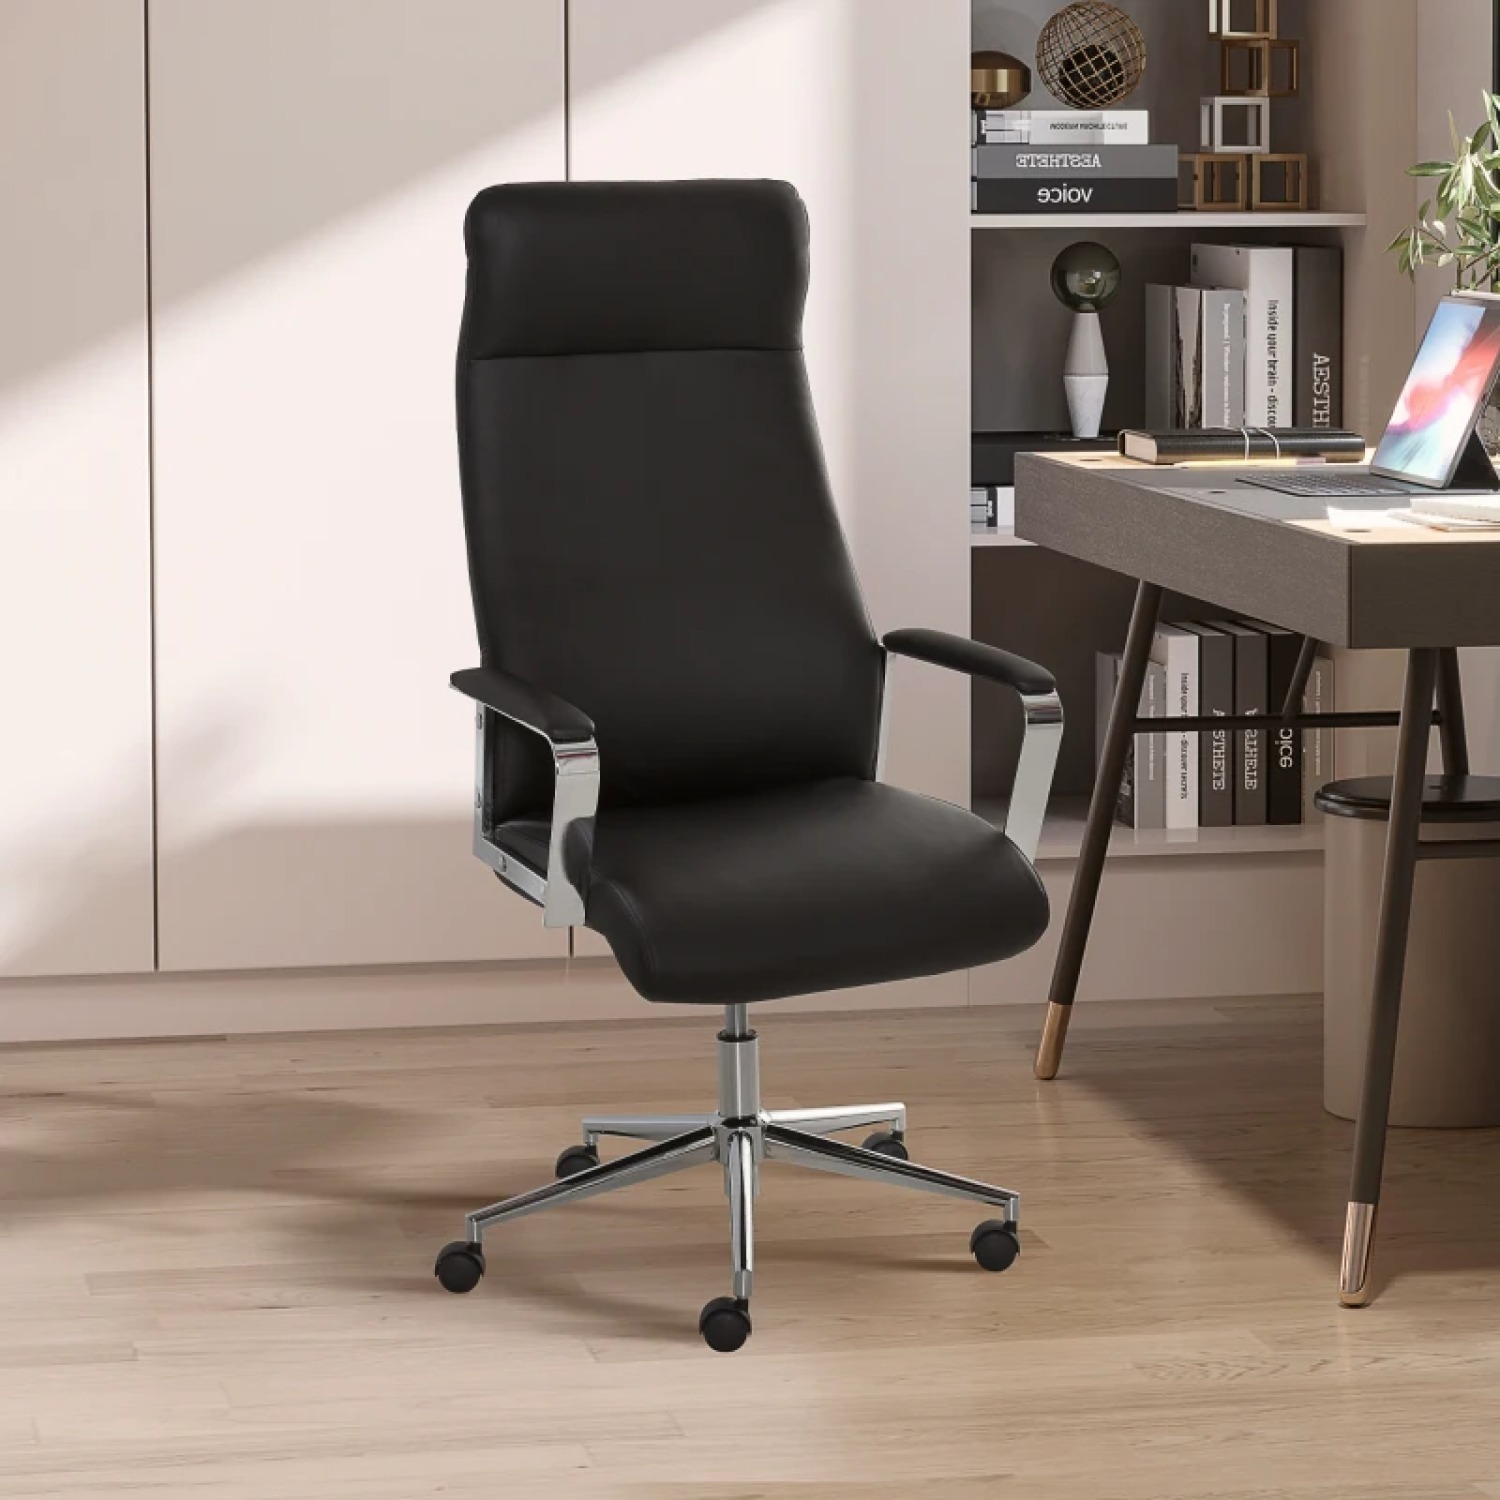 Vinsetto High Back Faux Leather Office Chair (Black) $75 + Free Shipping